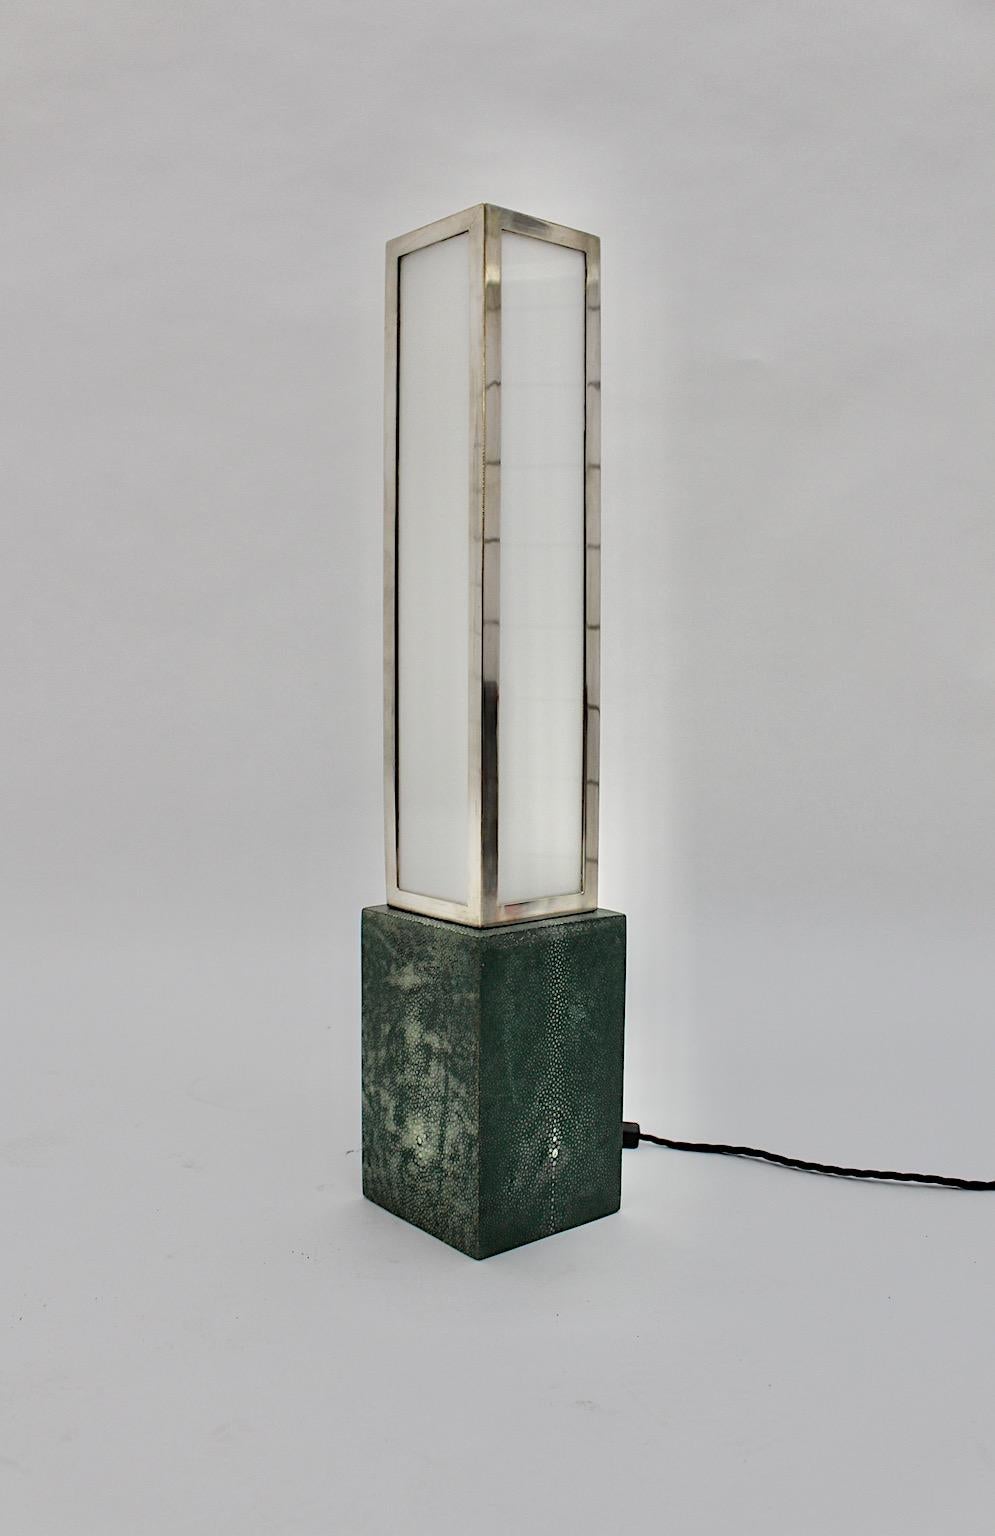 Plated Art Deco Vintage Geometric Table Lamp Style Eckart Muthesius 1920s Germany For Sale